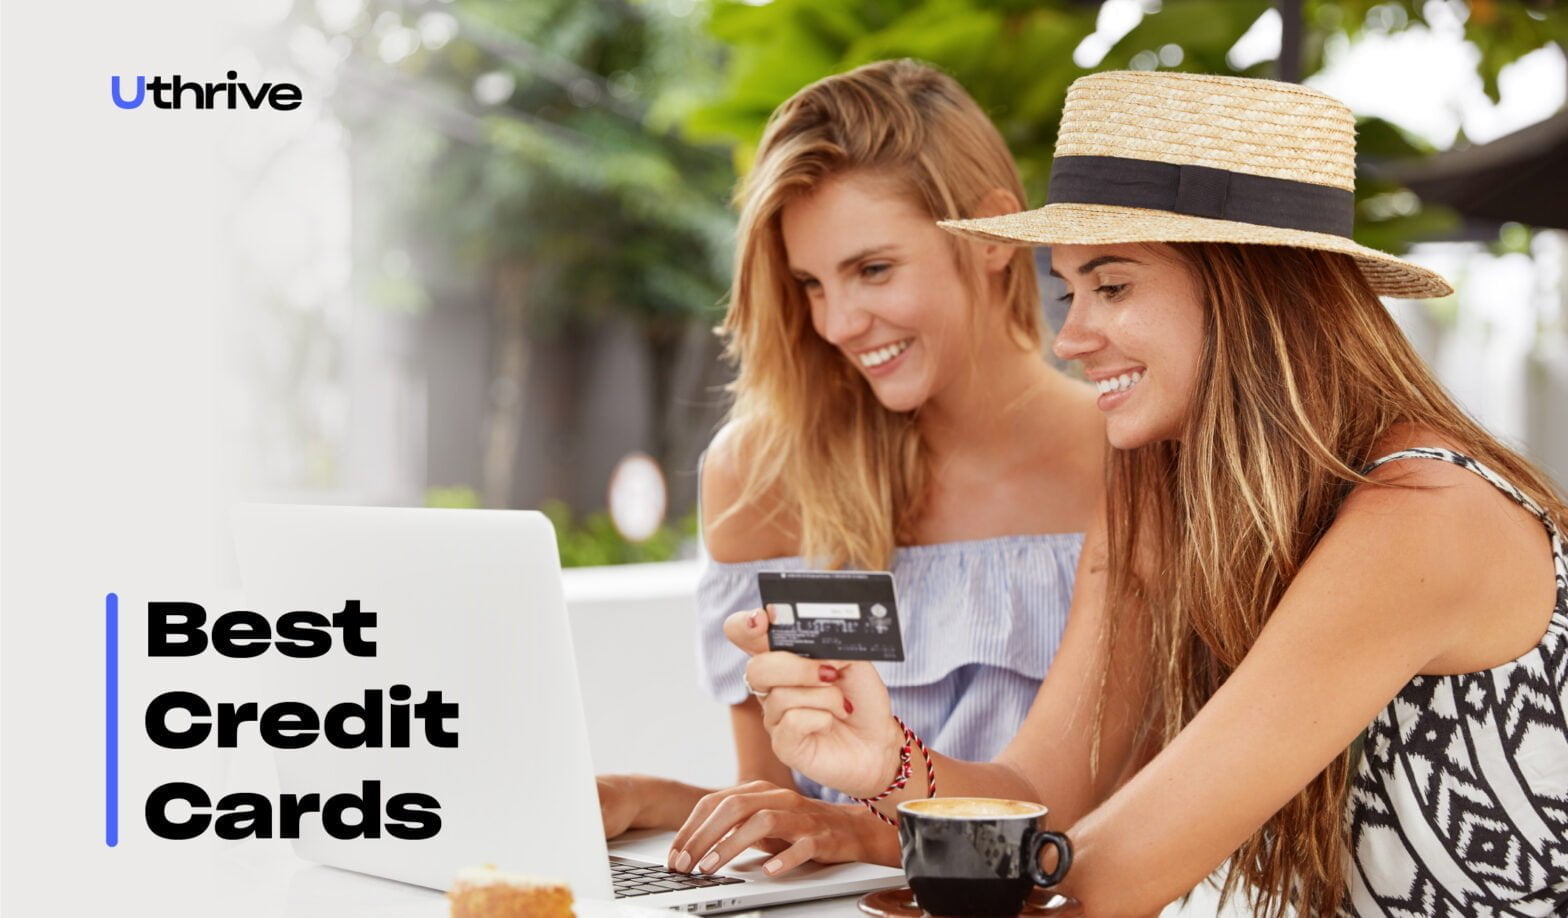 Guide on How To Choose the Best Credit Cards